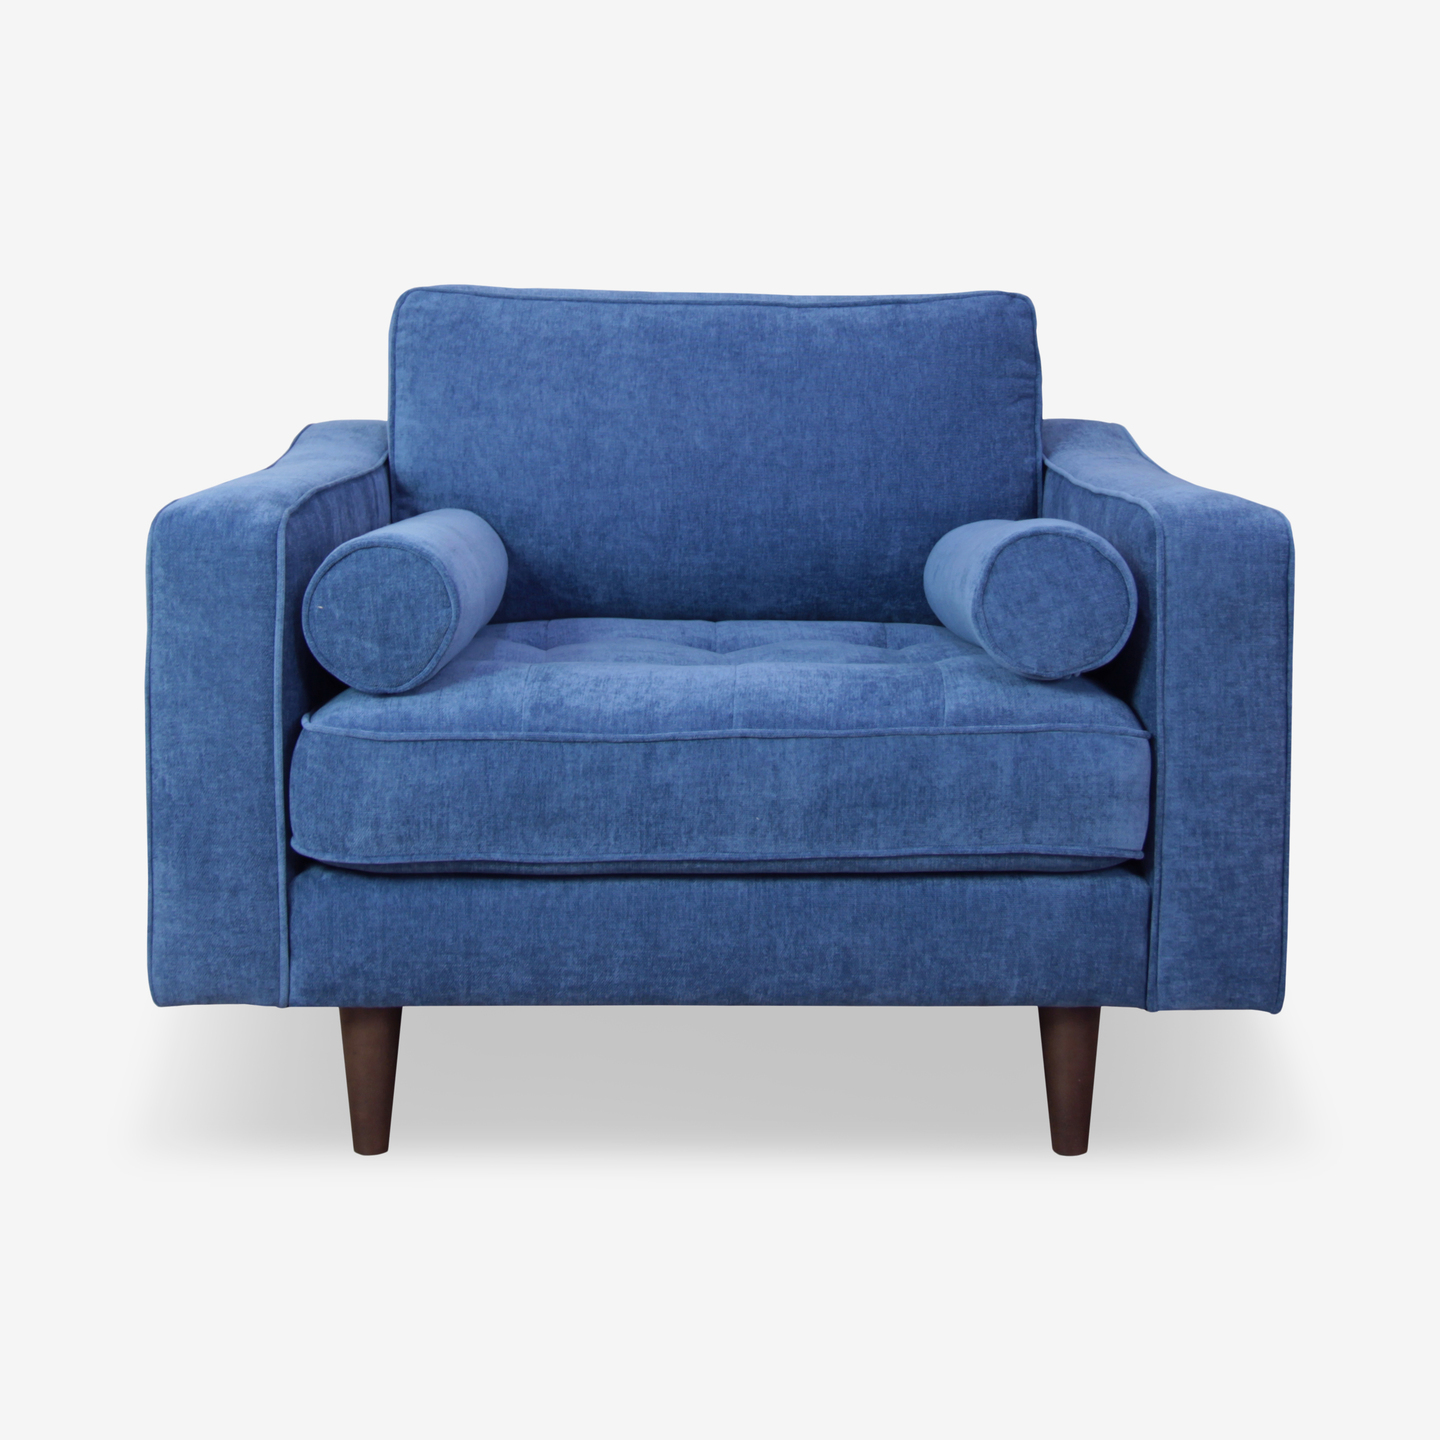 1184_Martell-Chair-Blue_front_2020